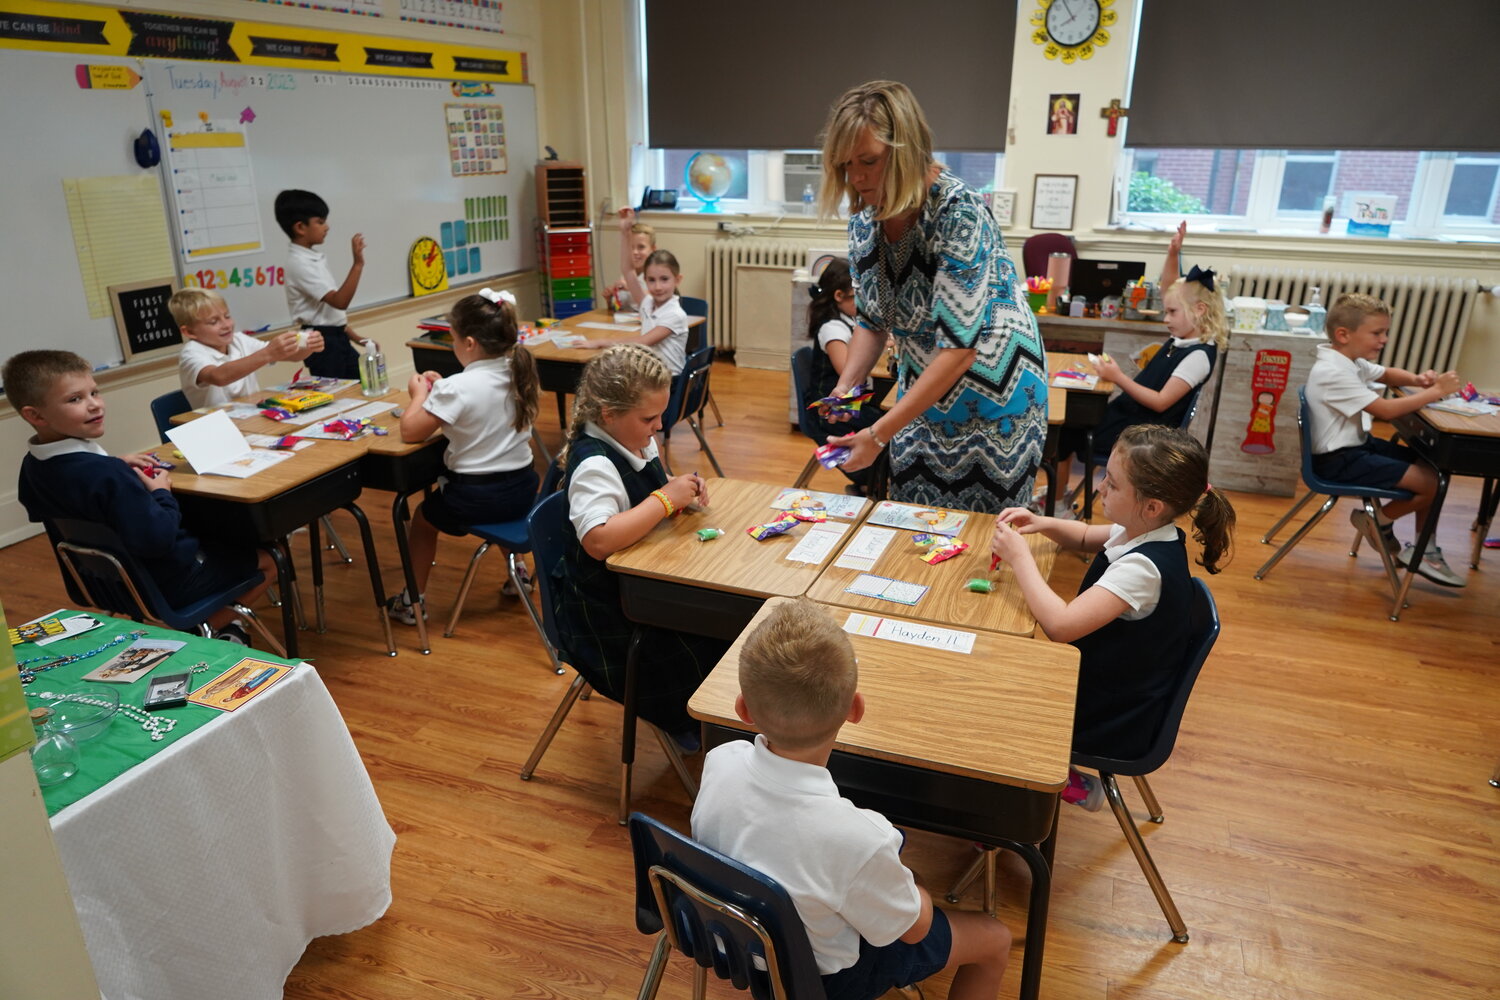 Second-grade teacher Becky Thomas distributes colorful modeling clay to her students on the first day of school at Holy Family School in Hannibal.